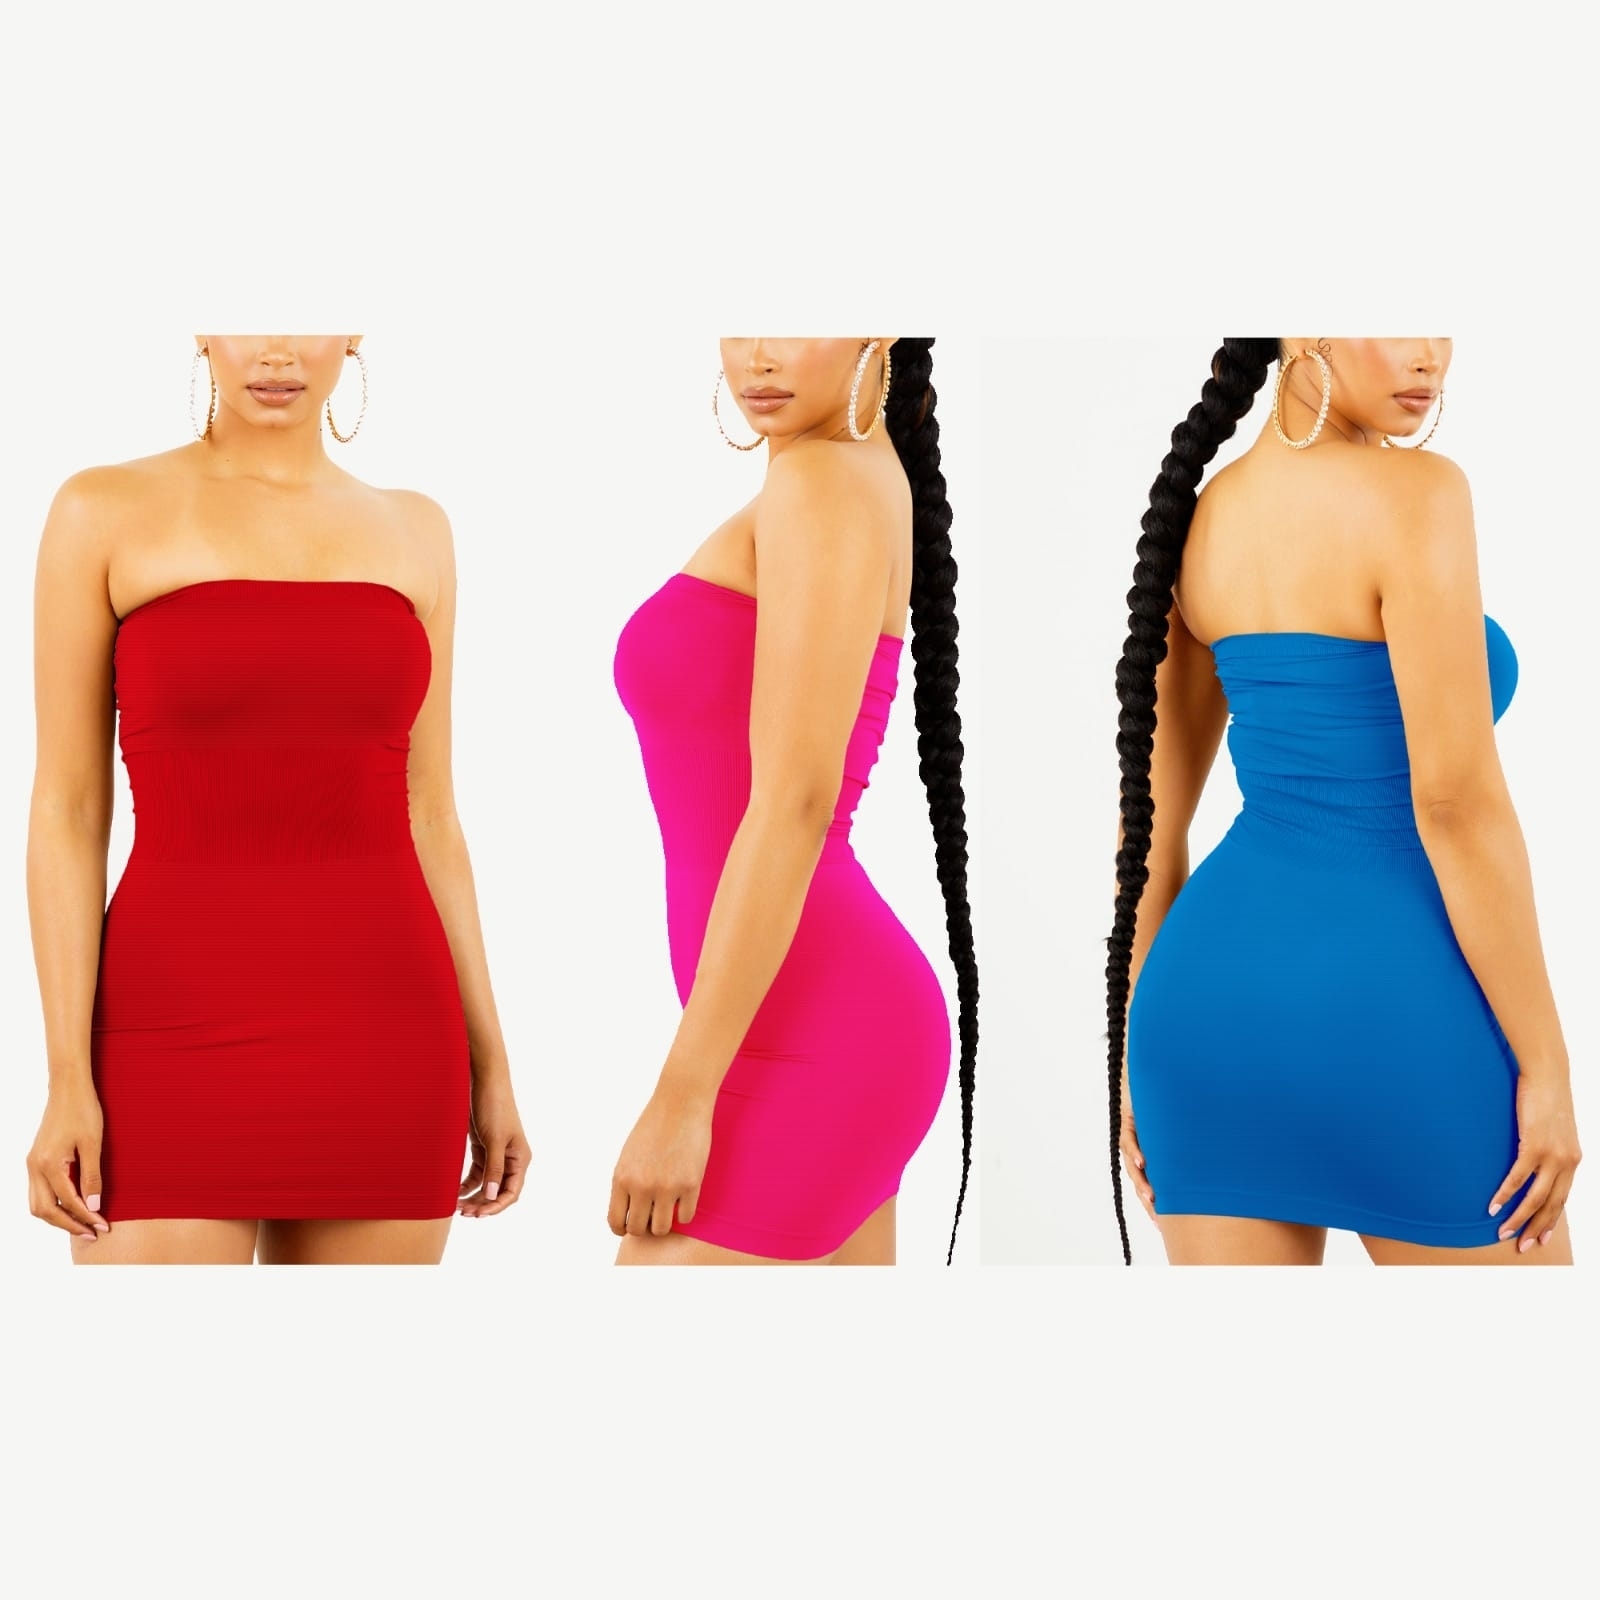 2-Pack Women's Strapless Stretchy Tight Fit Seamless Body Con Mini Tube Top Dress - BLUE, XS